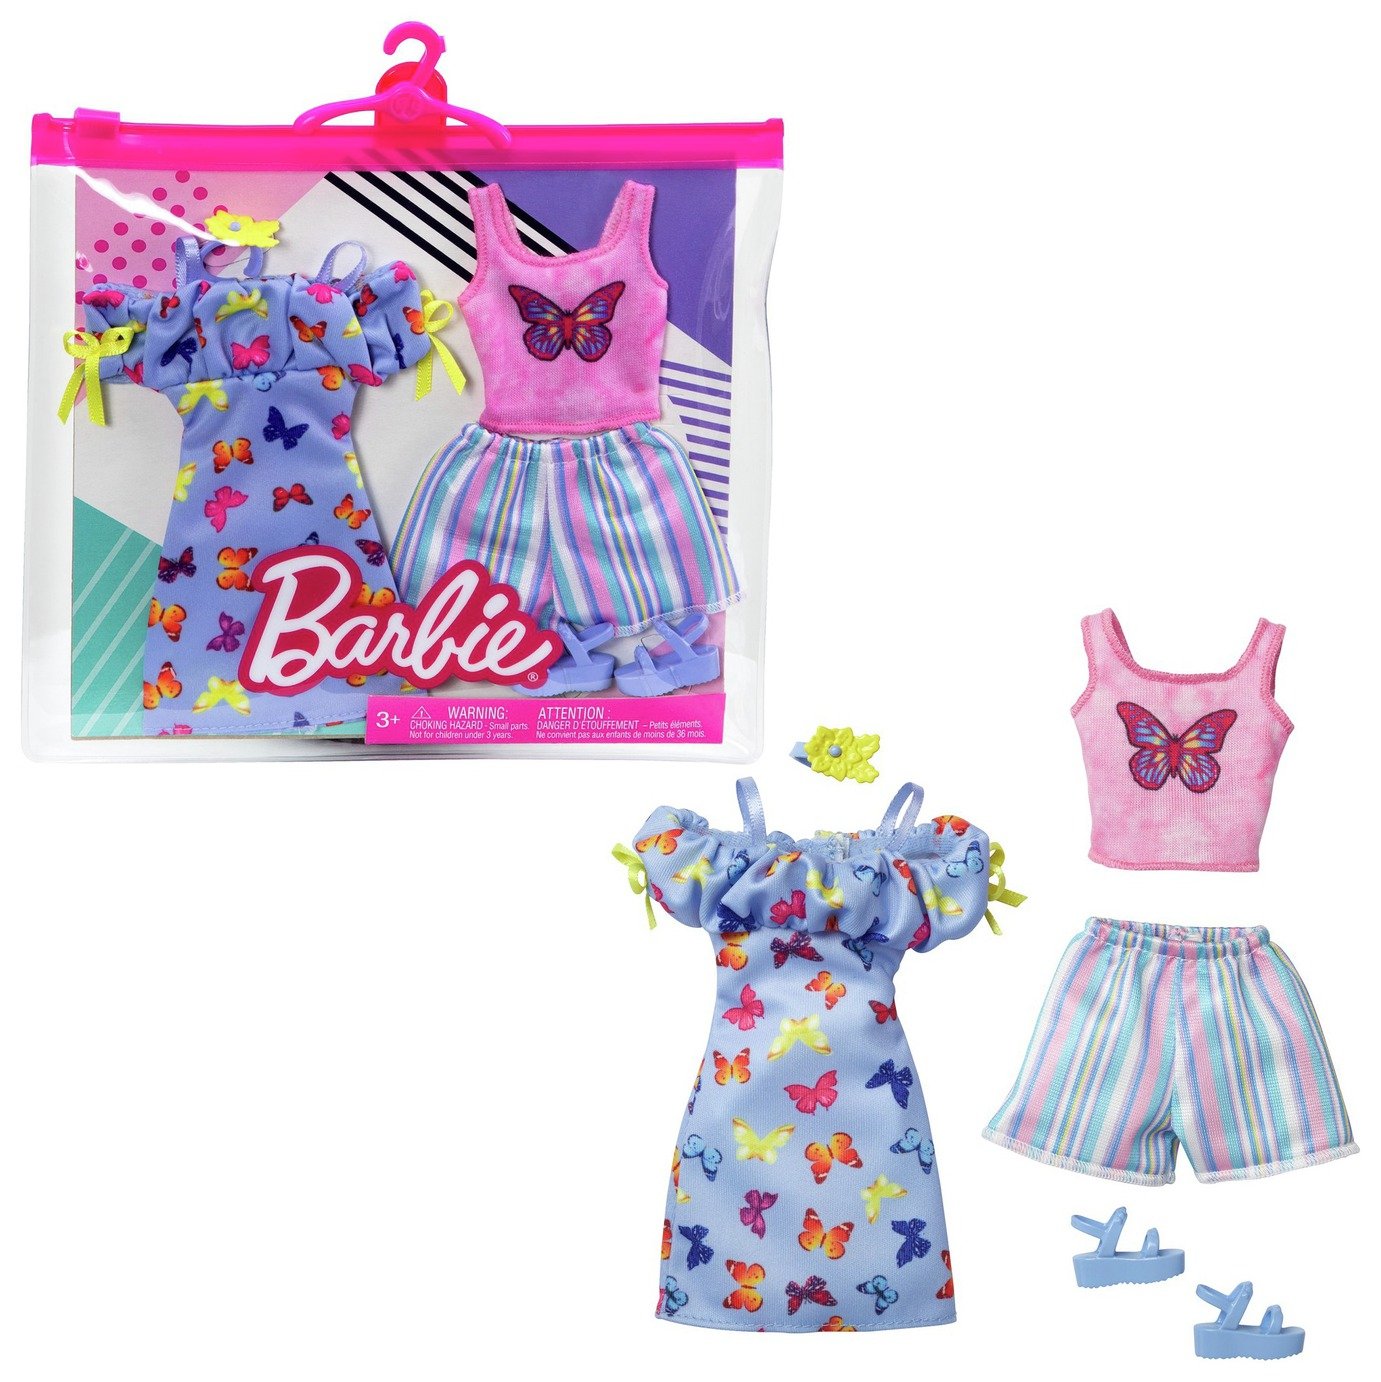 pictures of barbie clothes